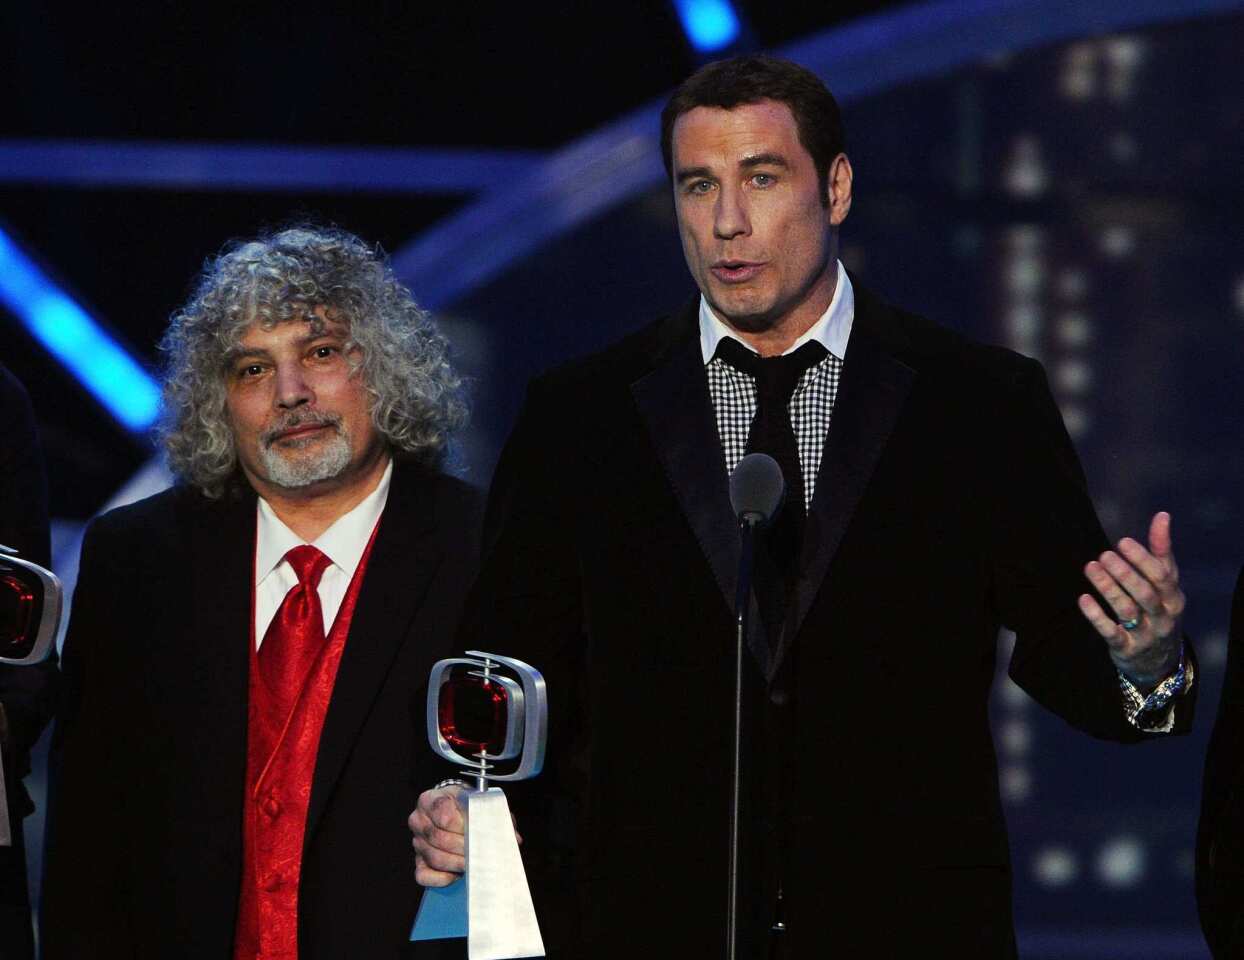 Hegyes (Juan Epstein) played Det. Manny Esposito on the 1980s TV show "Cagney and Lacey" and appeared in dozens of TV shows. He died Jan. 26, 2012. Above, he is pictured with John Travolta at a "Kotter" reunion in 2011.